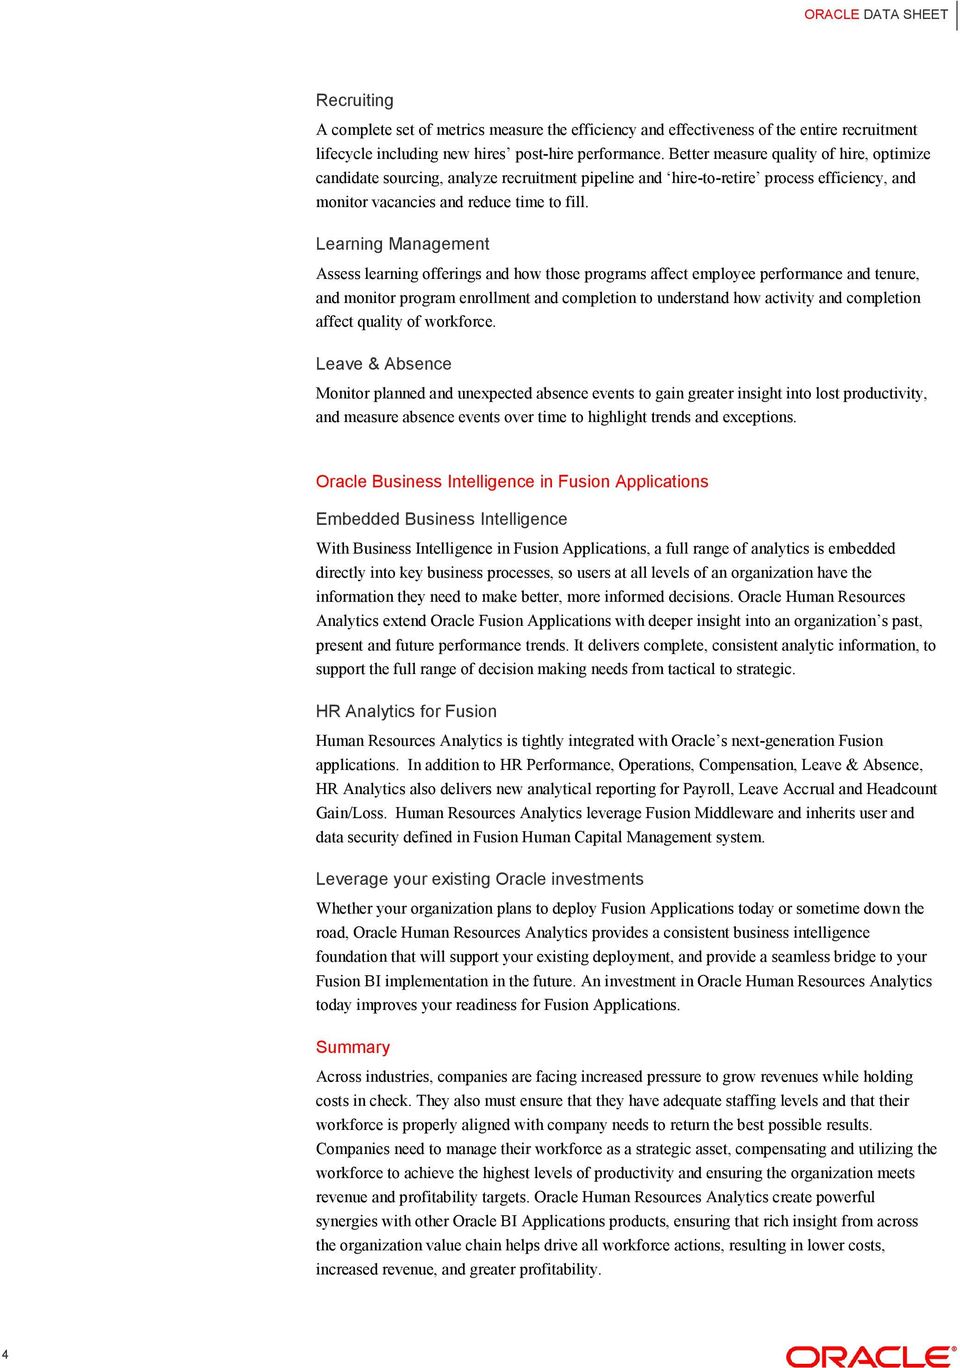 Learning Management Assess learning offerings and how those programs affect employee performance and tenure, and monitor program enrollment and completion to understand how activity and completion